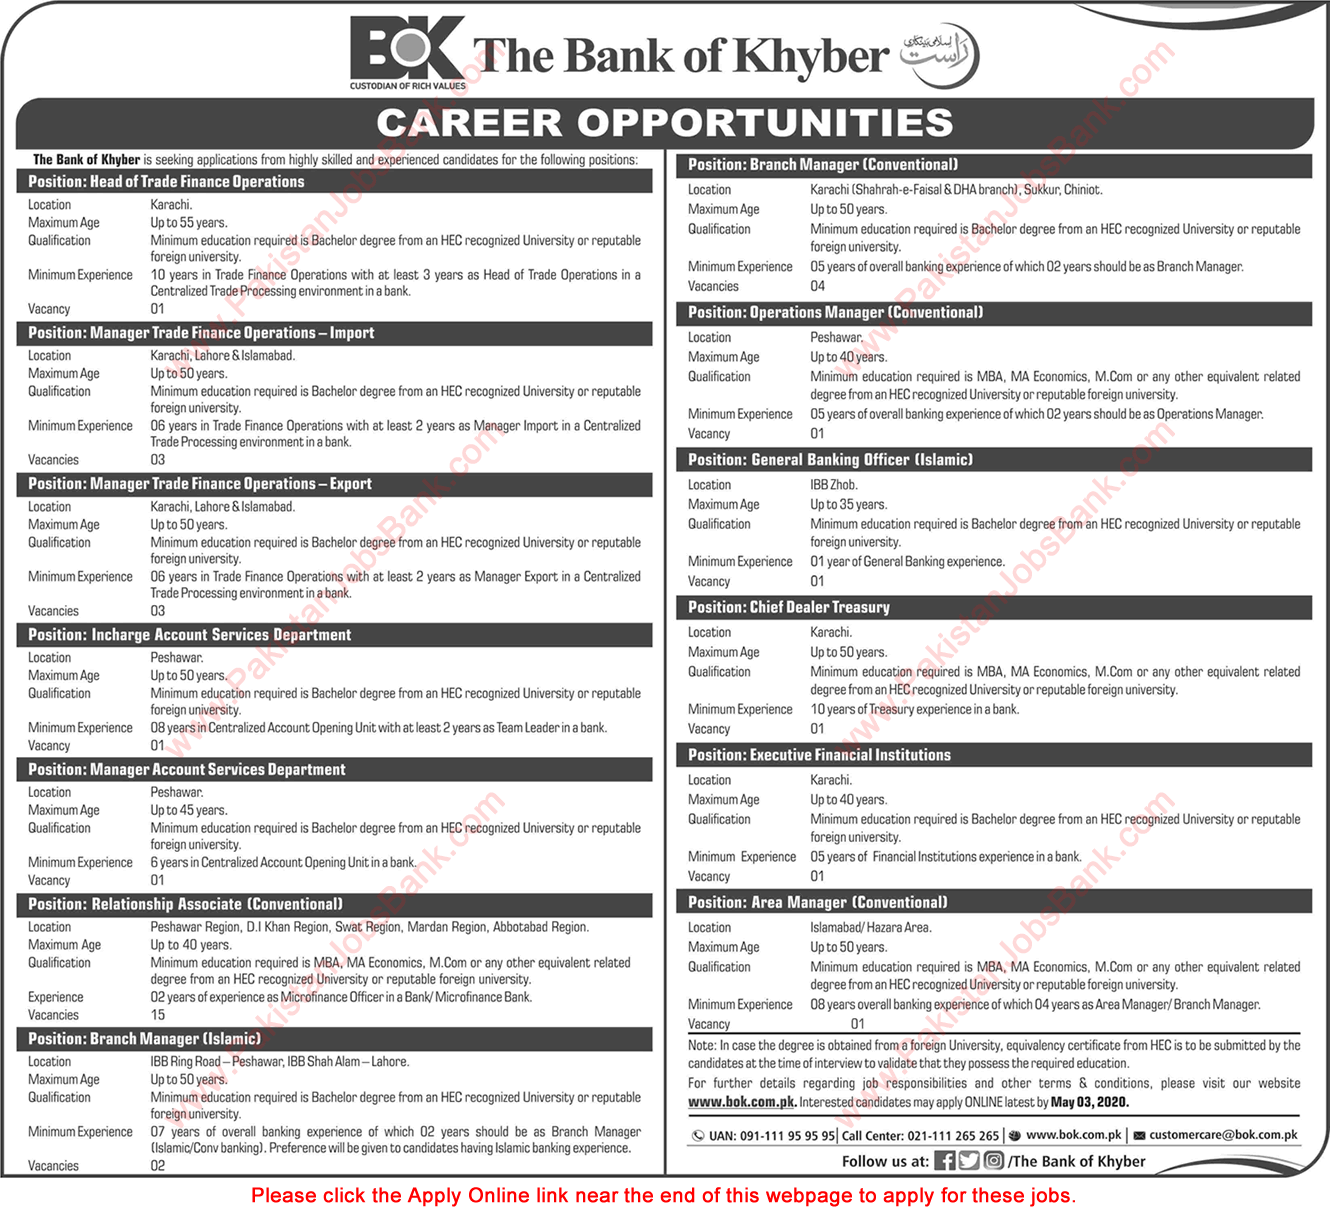 Bank of Khyber Jobs April 2020 Apply Online Relationship Associates, Branch Managers & Others Latest